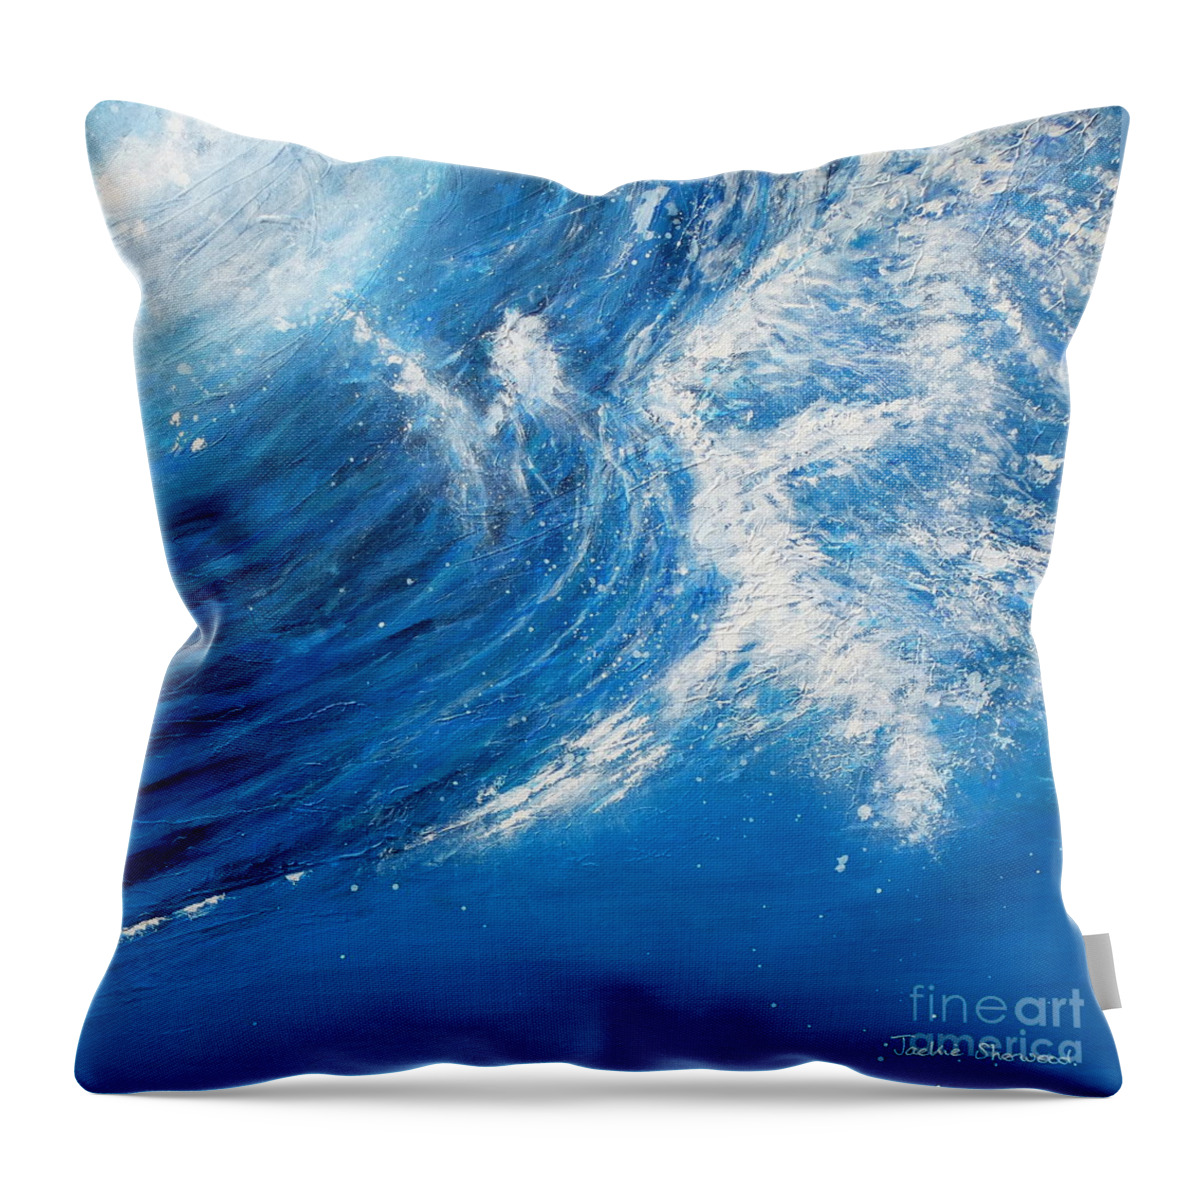 Ocean Throw Pillow featuring the painting Fluidity by Jackie Sherwood